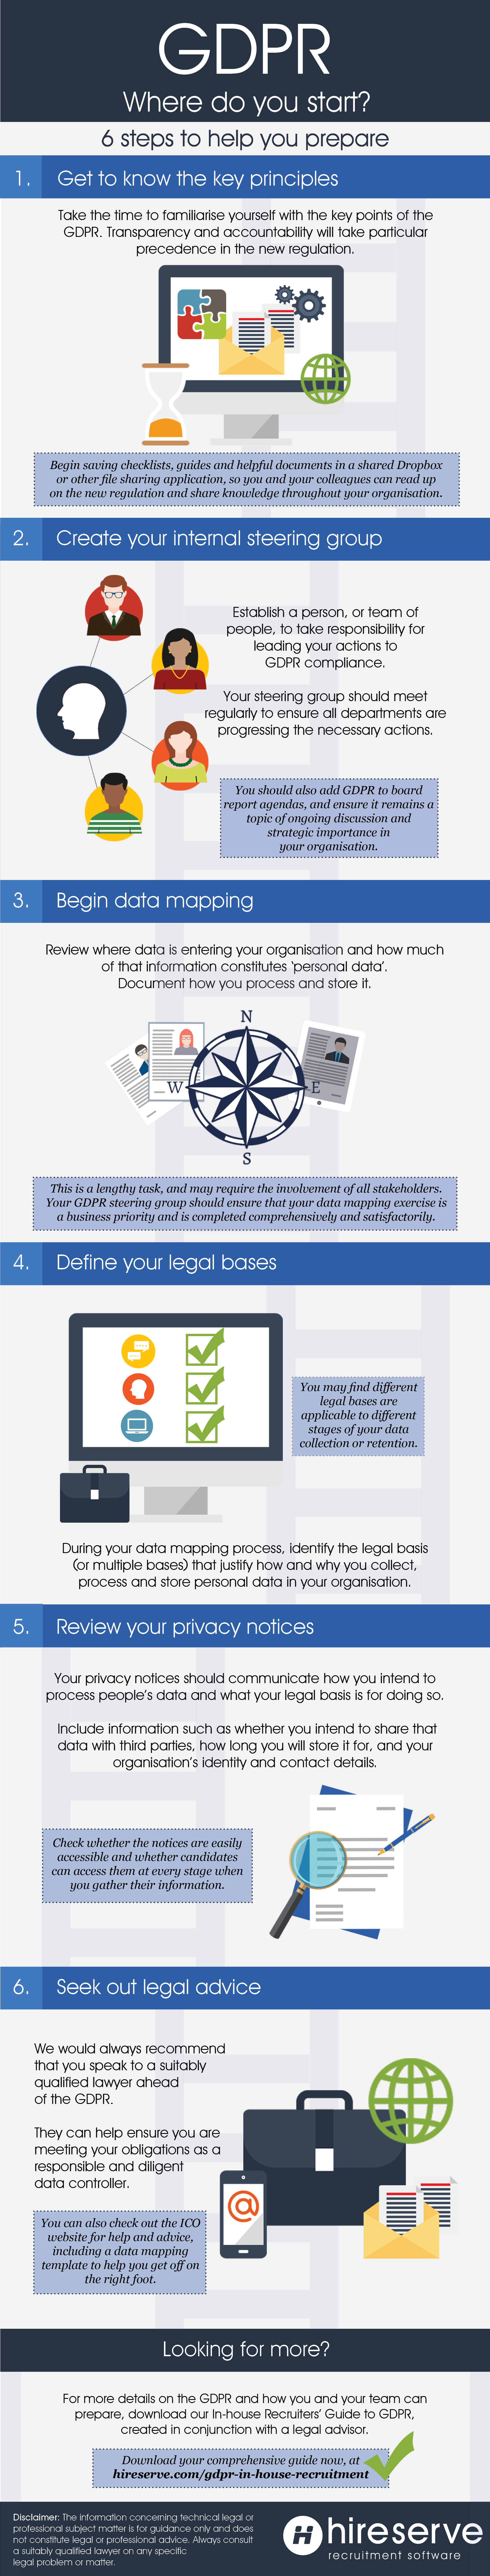 GDPR Recruitment Infographic - 6 steps to help you prepare